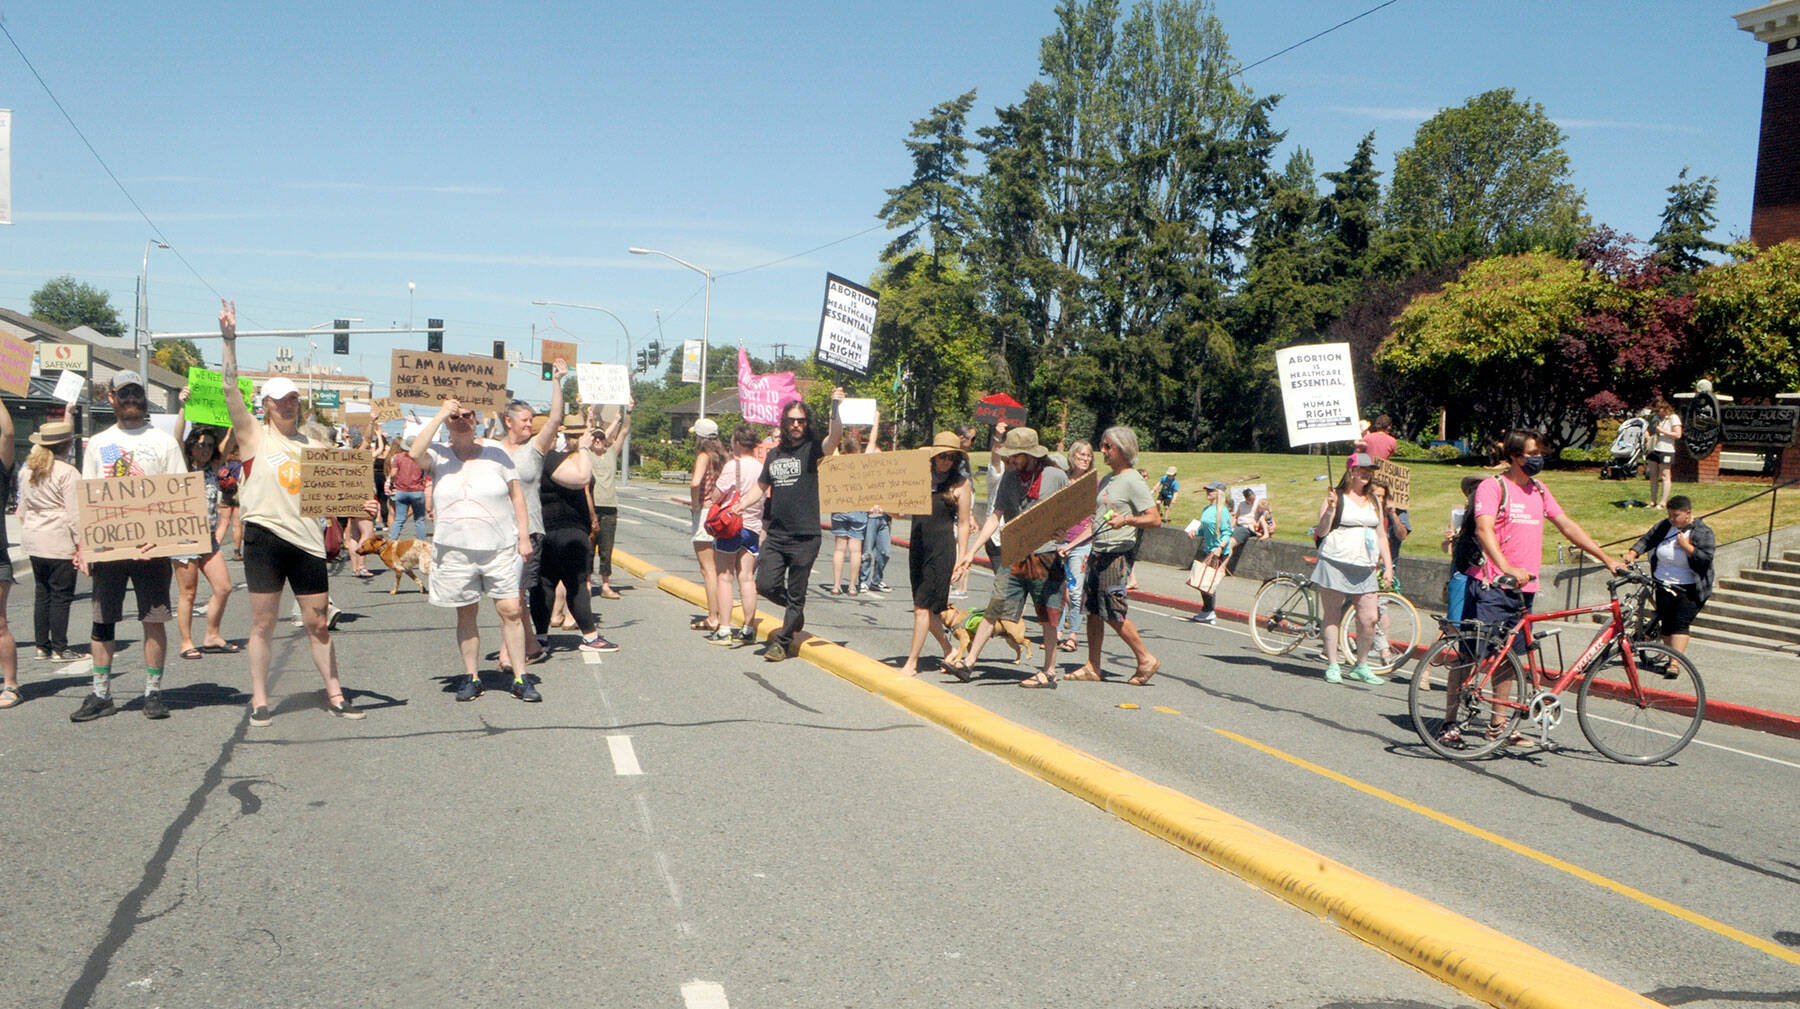 Women’s rights supporters block traffic on Lincoln Street in front of the Clallam County Courthouse for 60 seconds on Saturday. (Keith Thorpe/Peninsula Daily News)